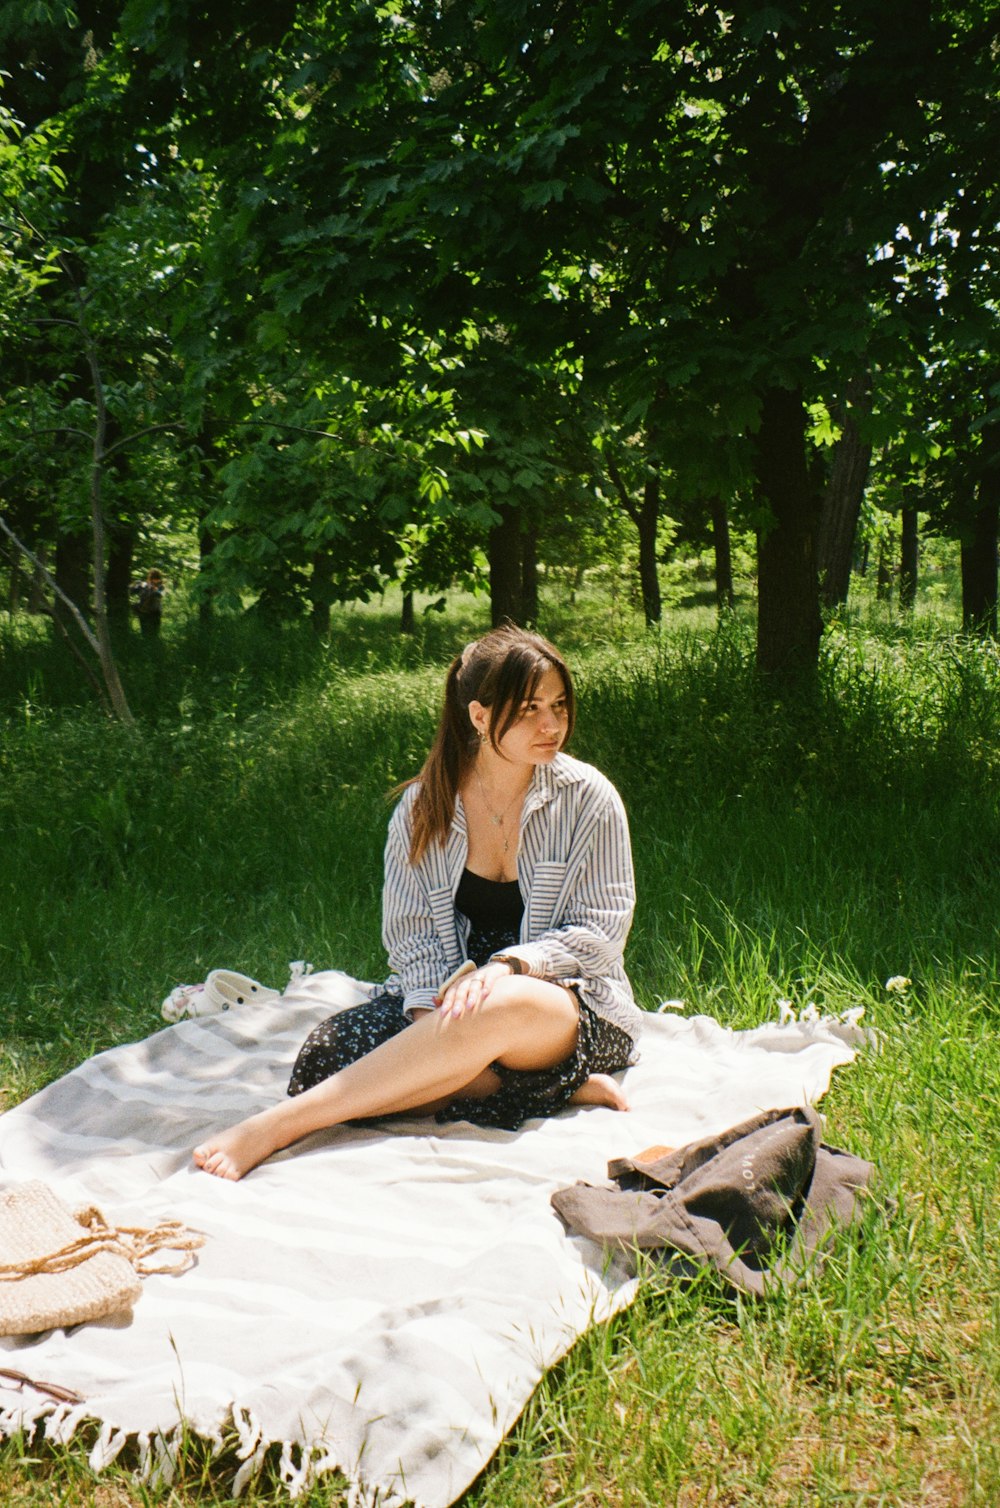 a person sitting on a blanket in a grassy area with trees in the background